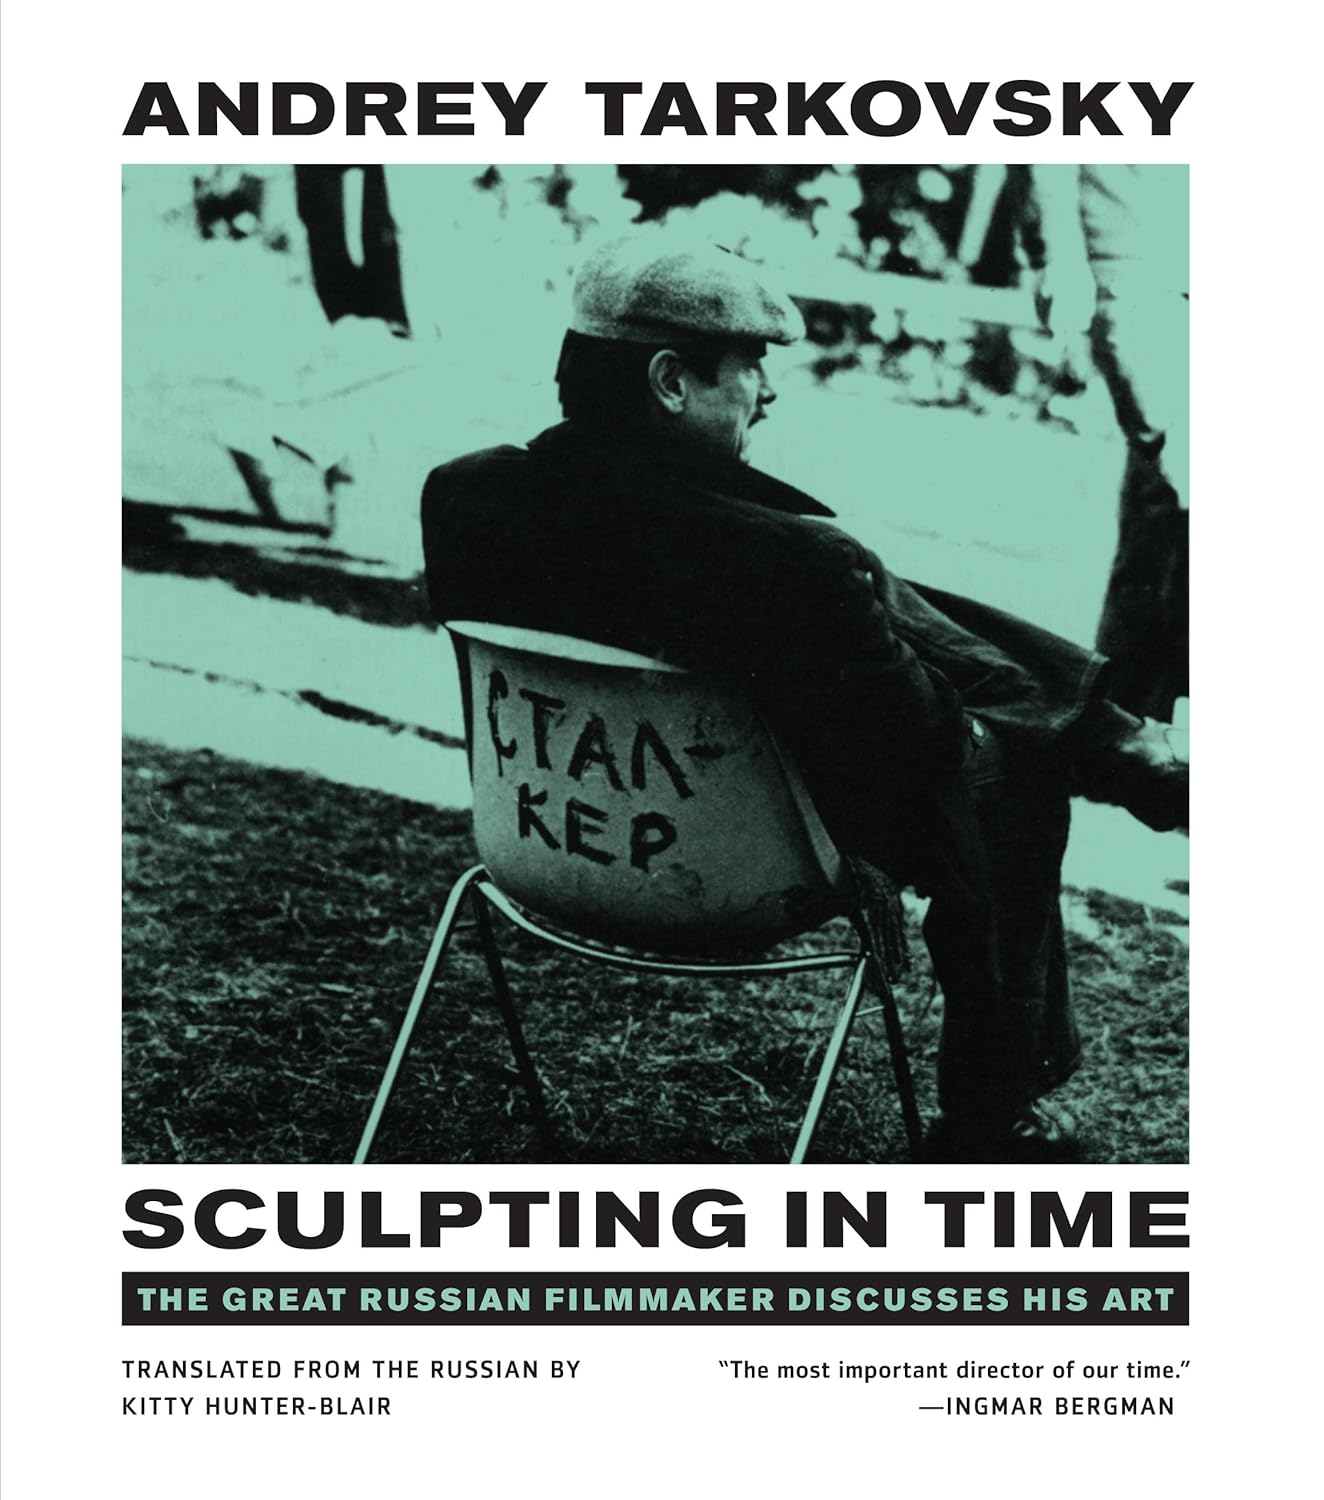 Sculpting in time (1989, University of Texas Press)